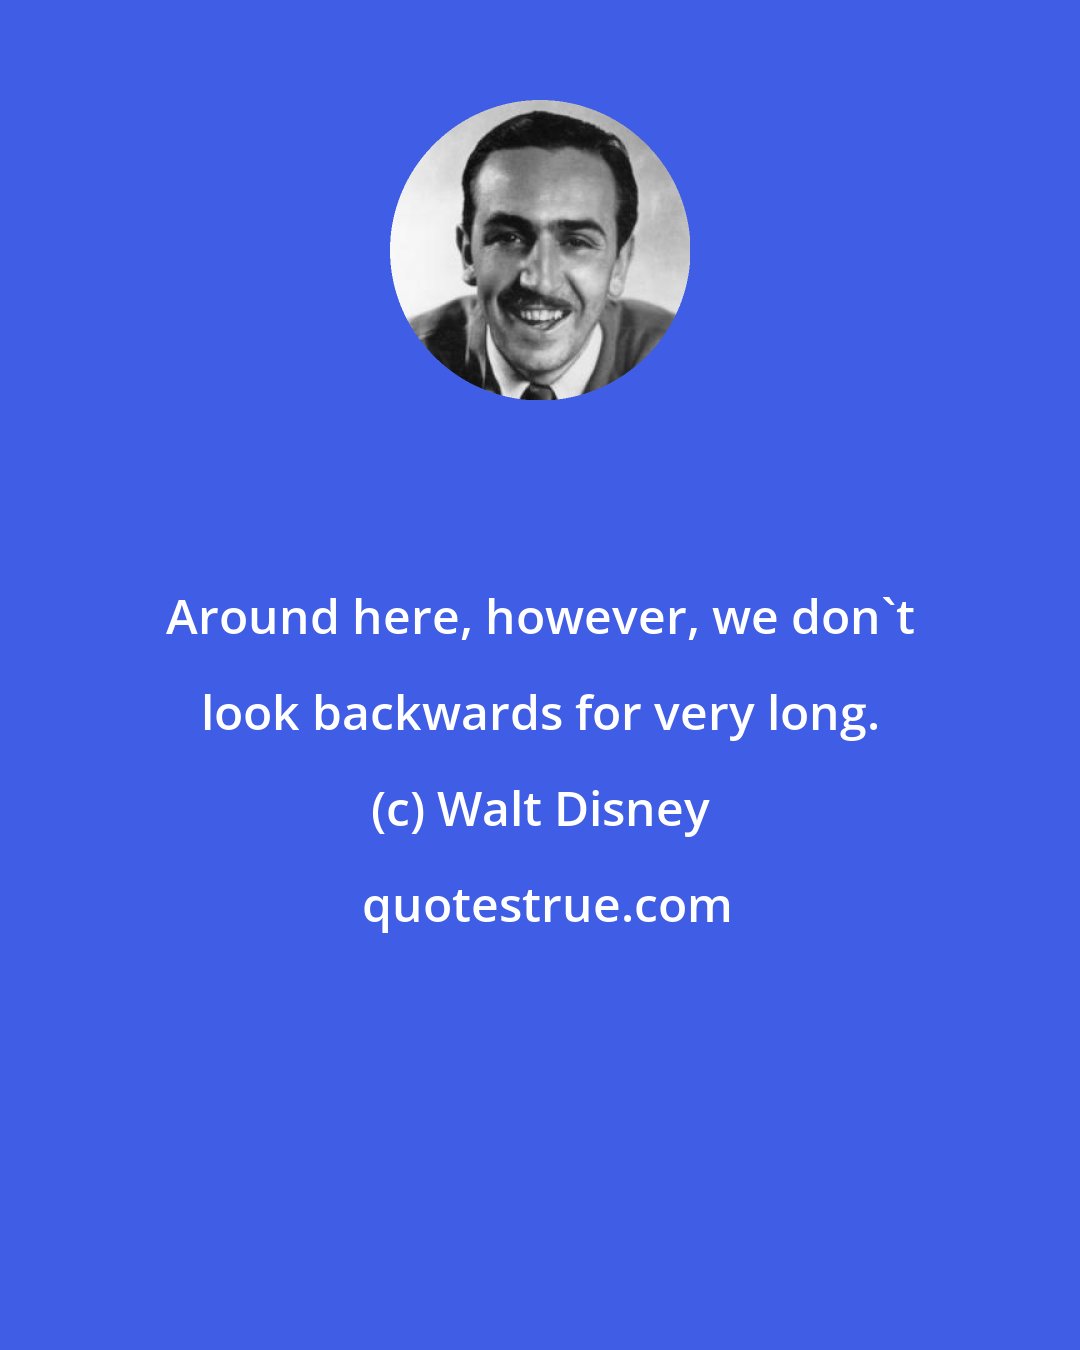 Walt Disney: Around here, however, we don't look backwards for very long.